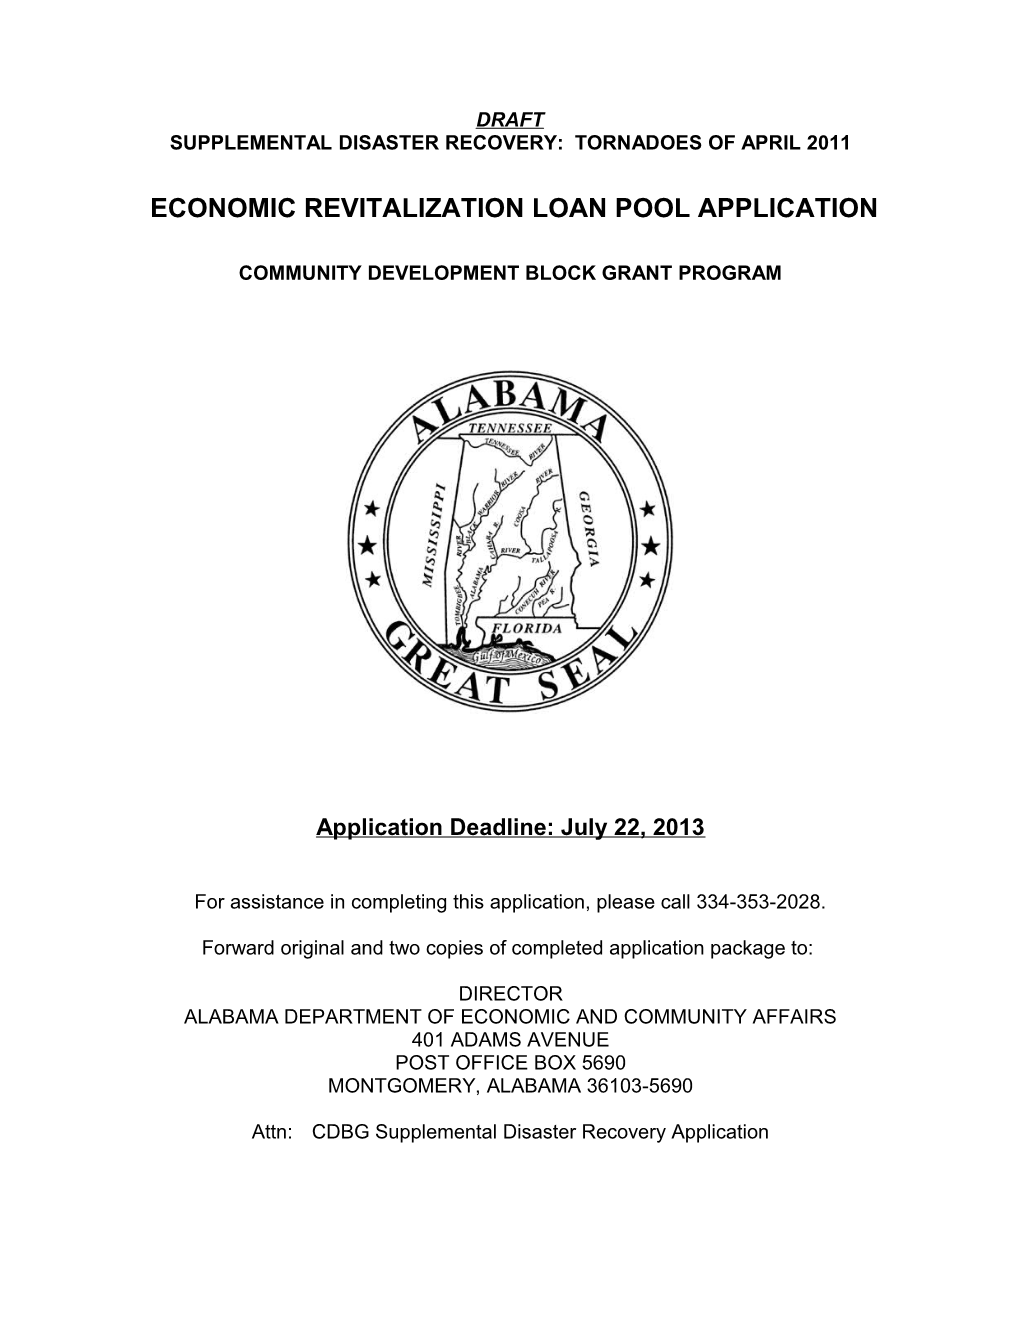 Cdbg Disaster Recovery Fund Application